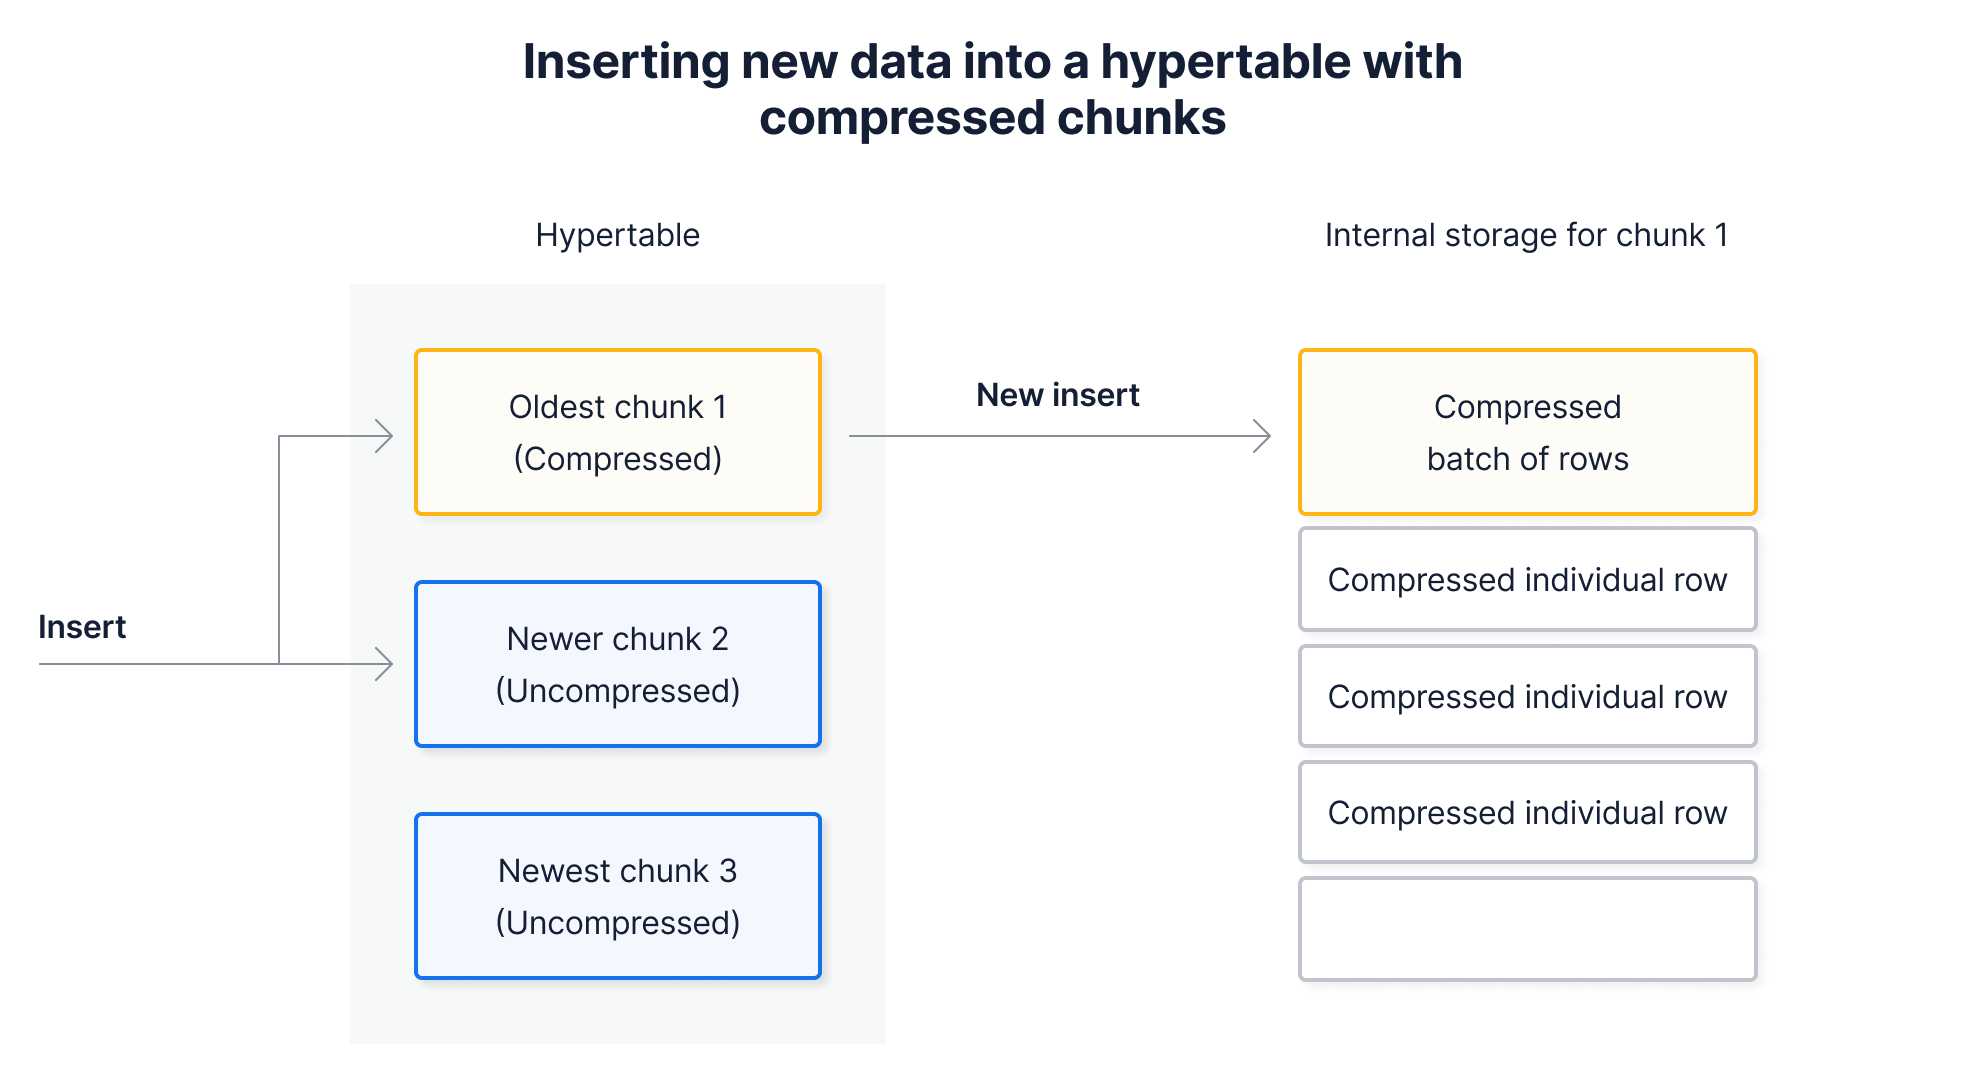 Architecture diagram illustrating how TimescaleDB handles inserts of new data into hypertables with compressed chunks.